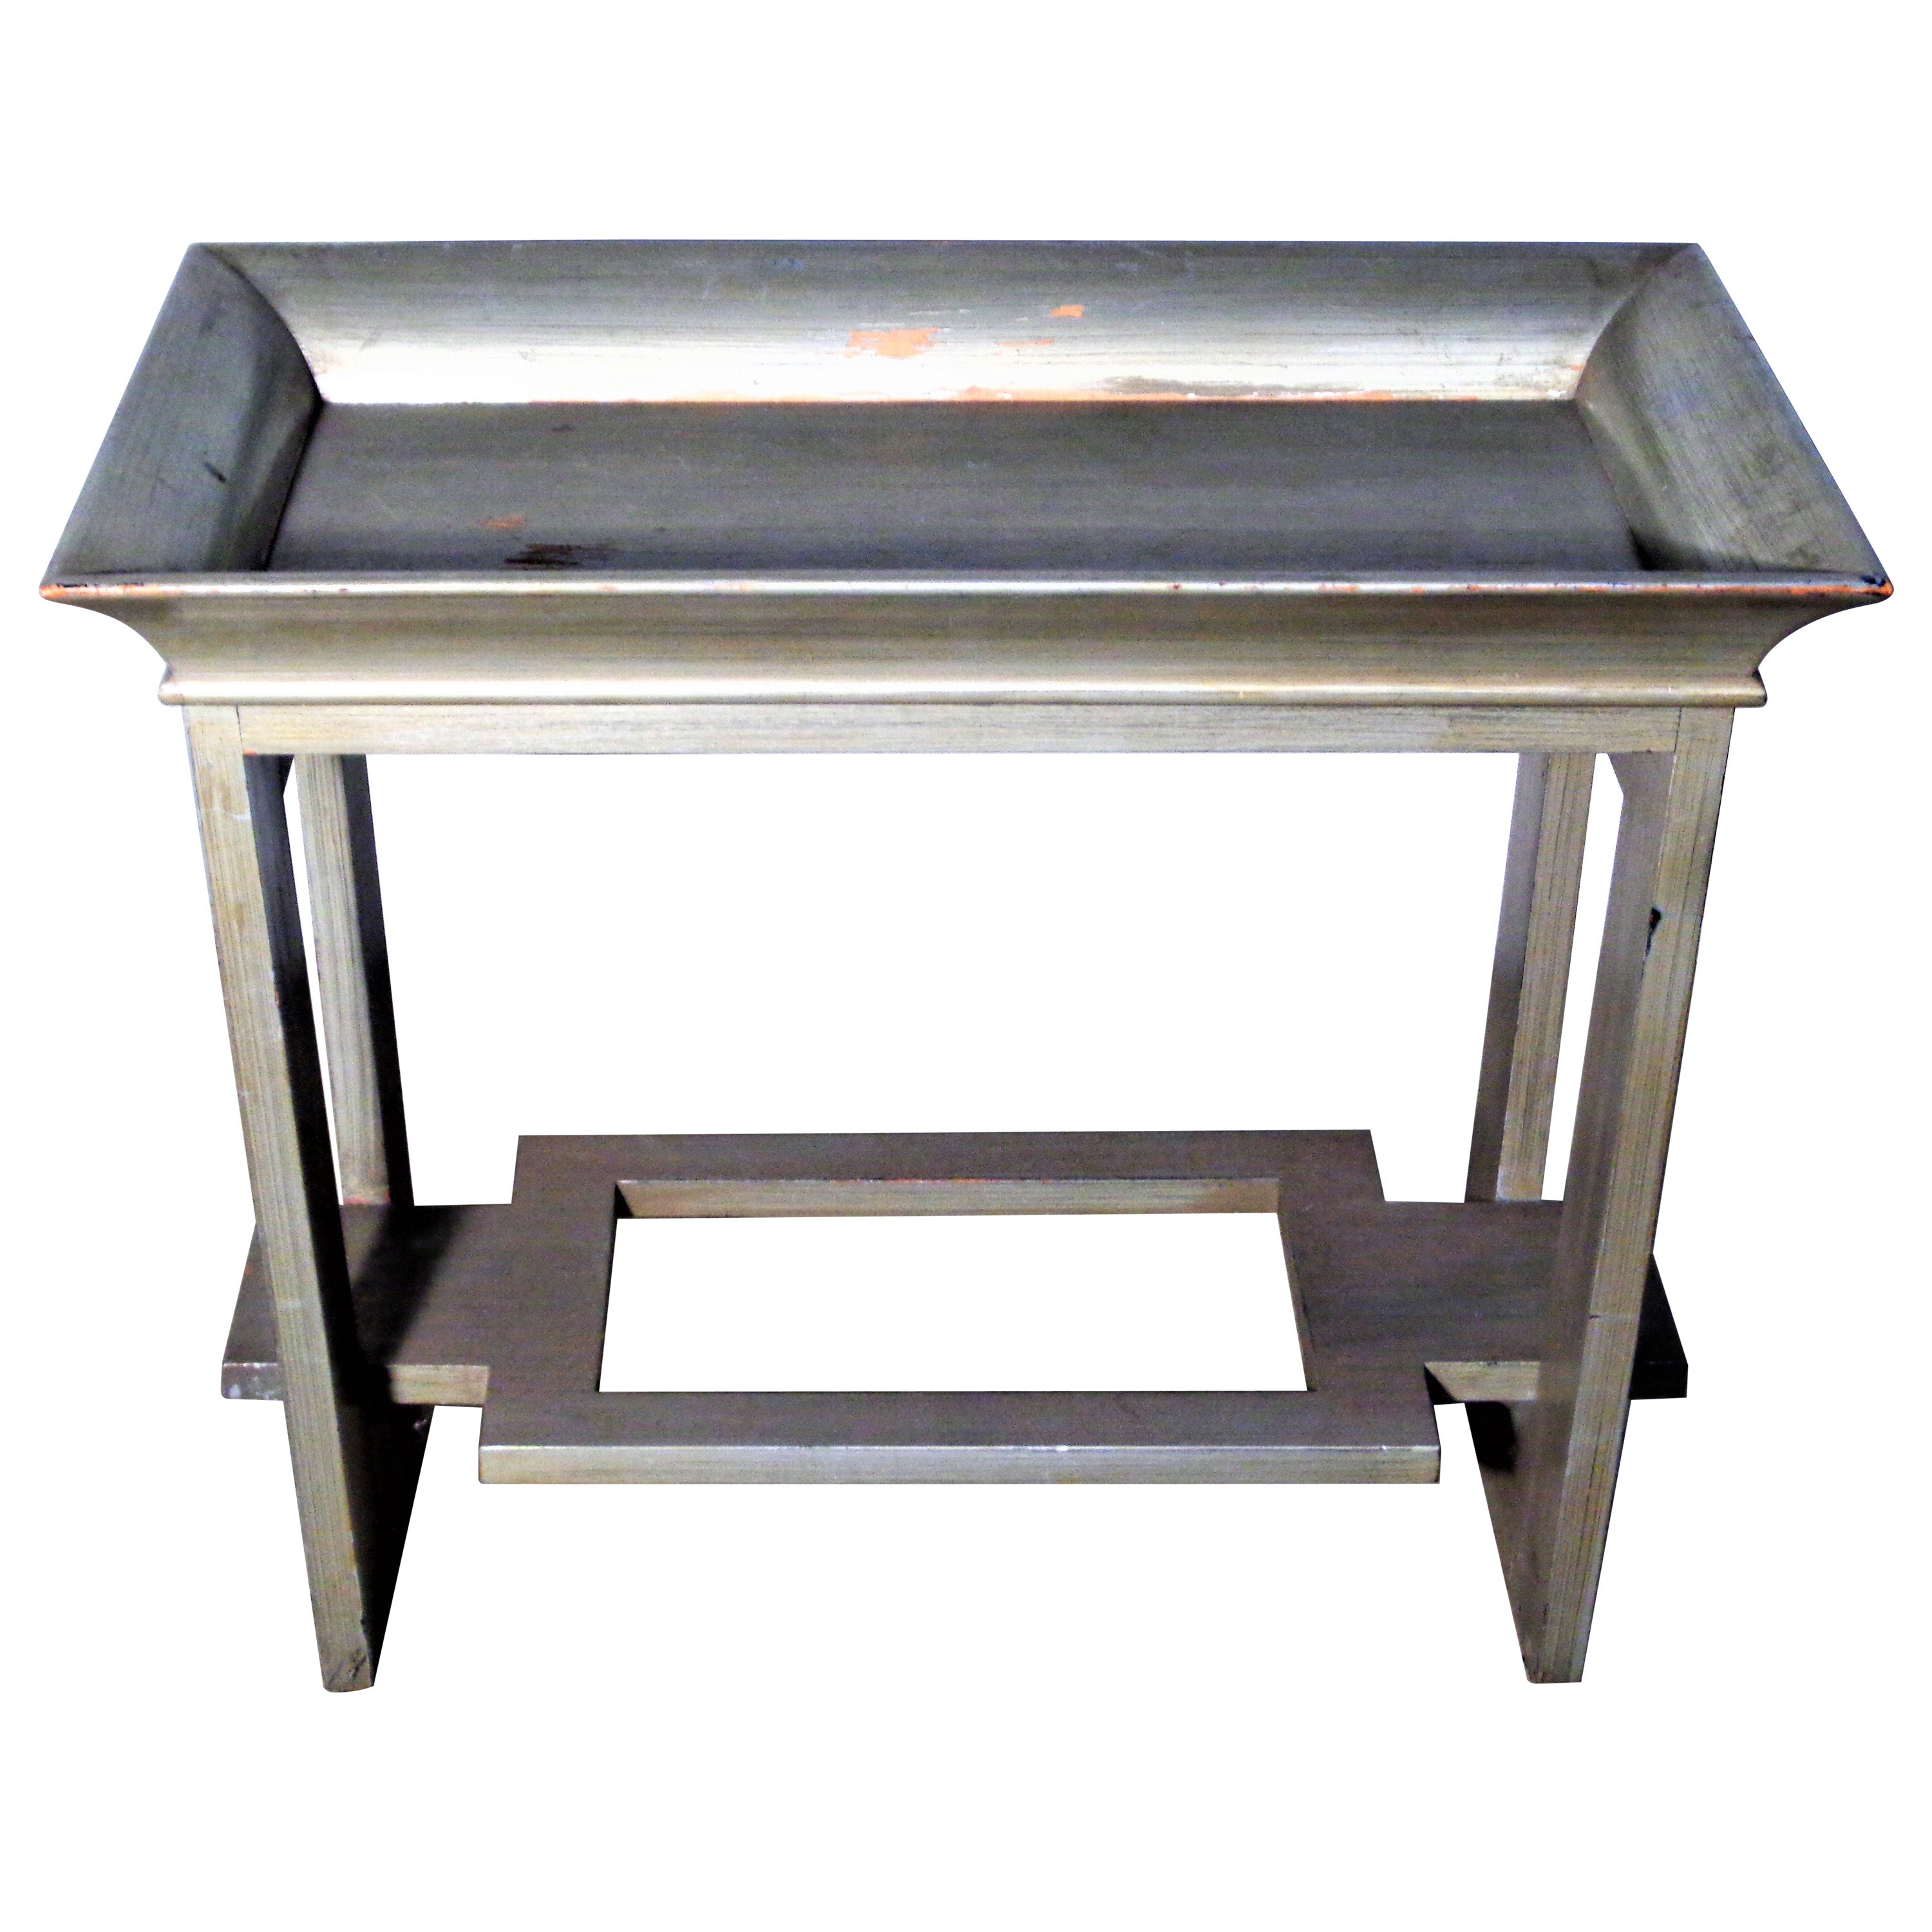 1940's Silver Leaf Tray Top Table For Sale